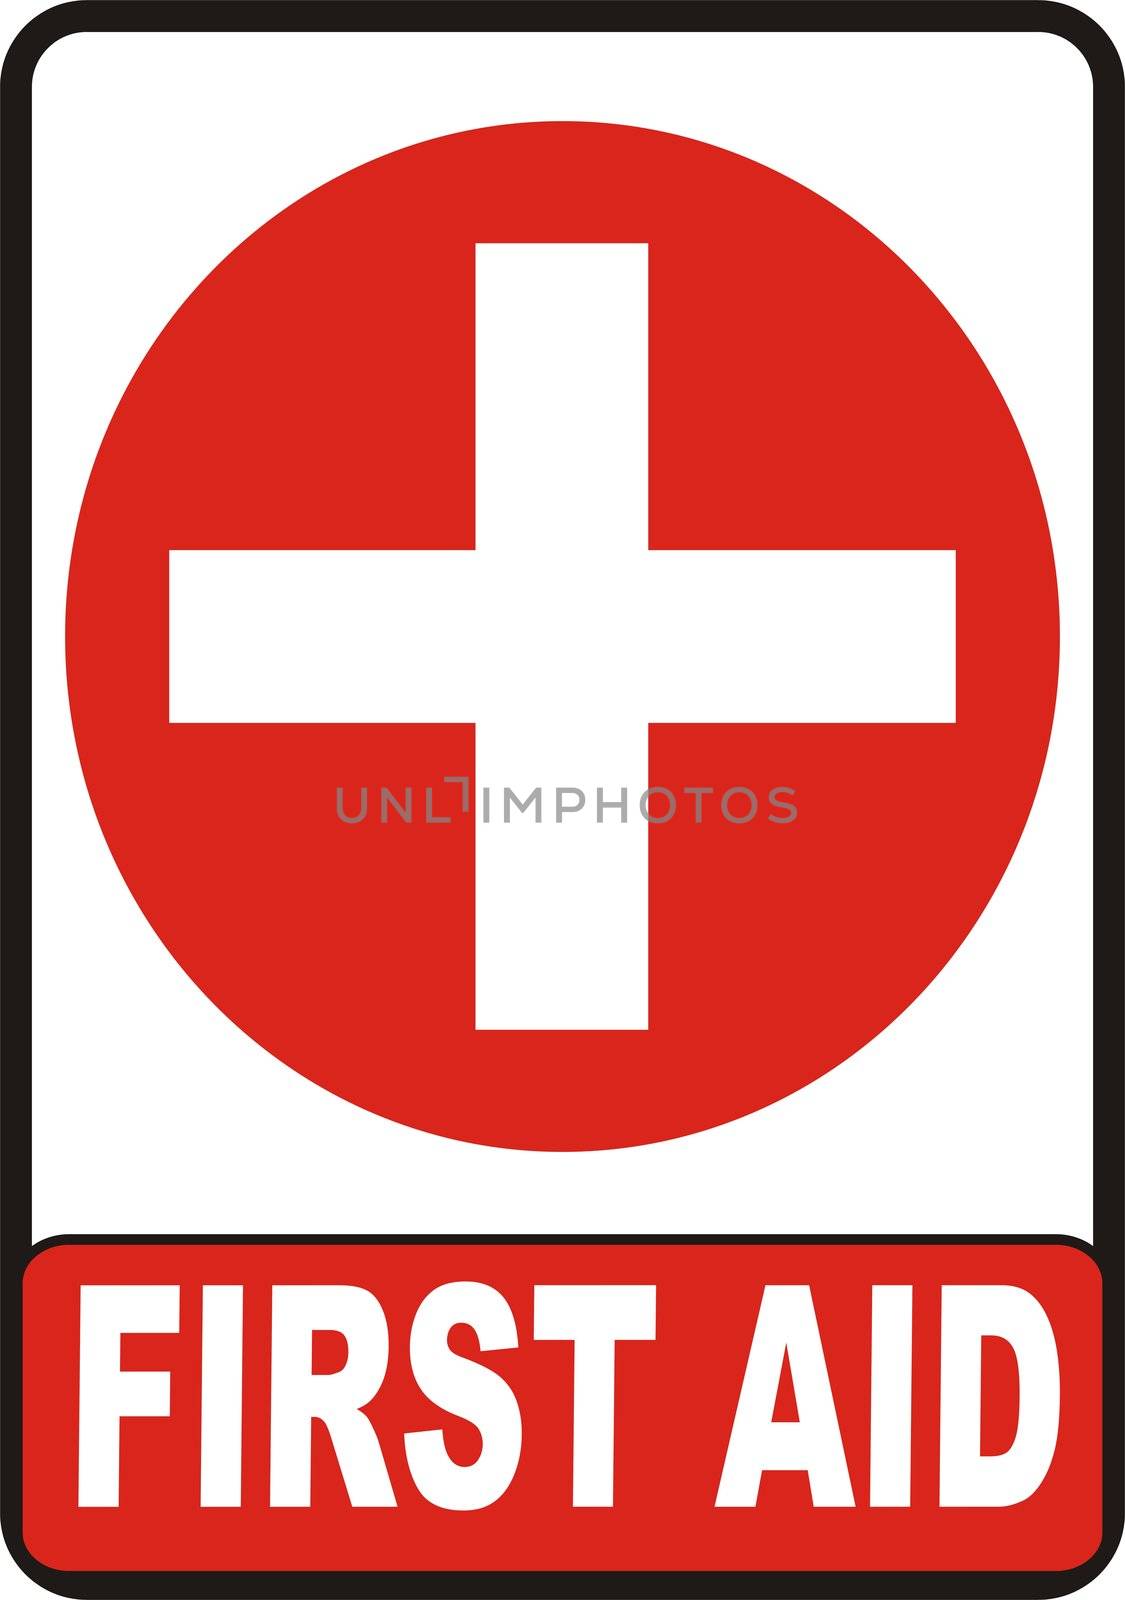 First Aid Sign by tony4urban